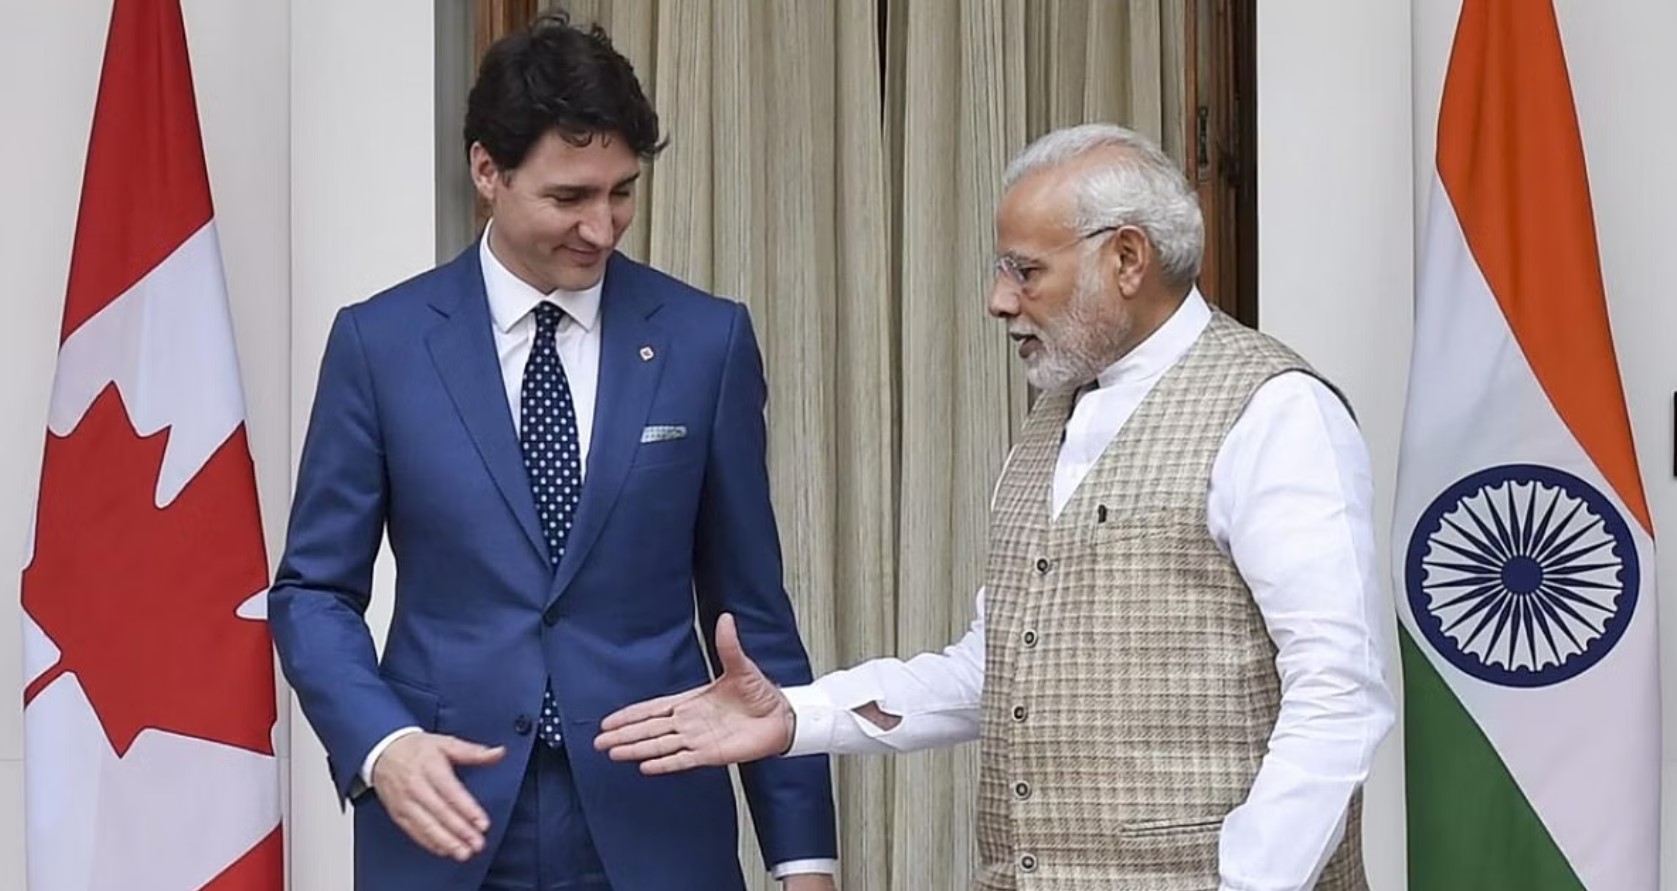 Canada and India Clash Over Murder Allegations